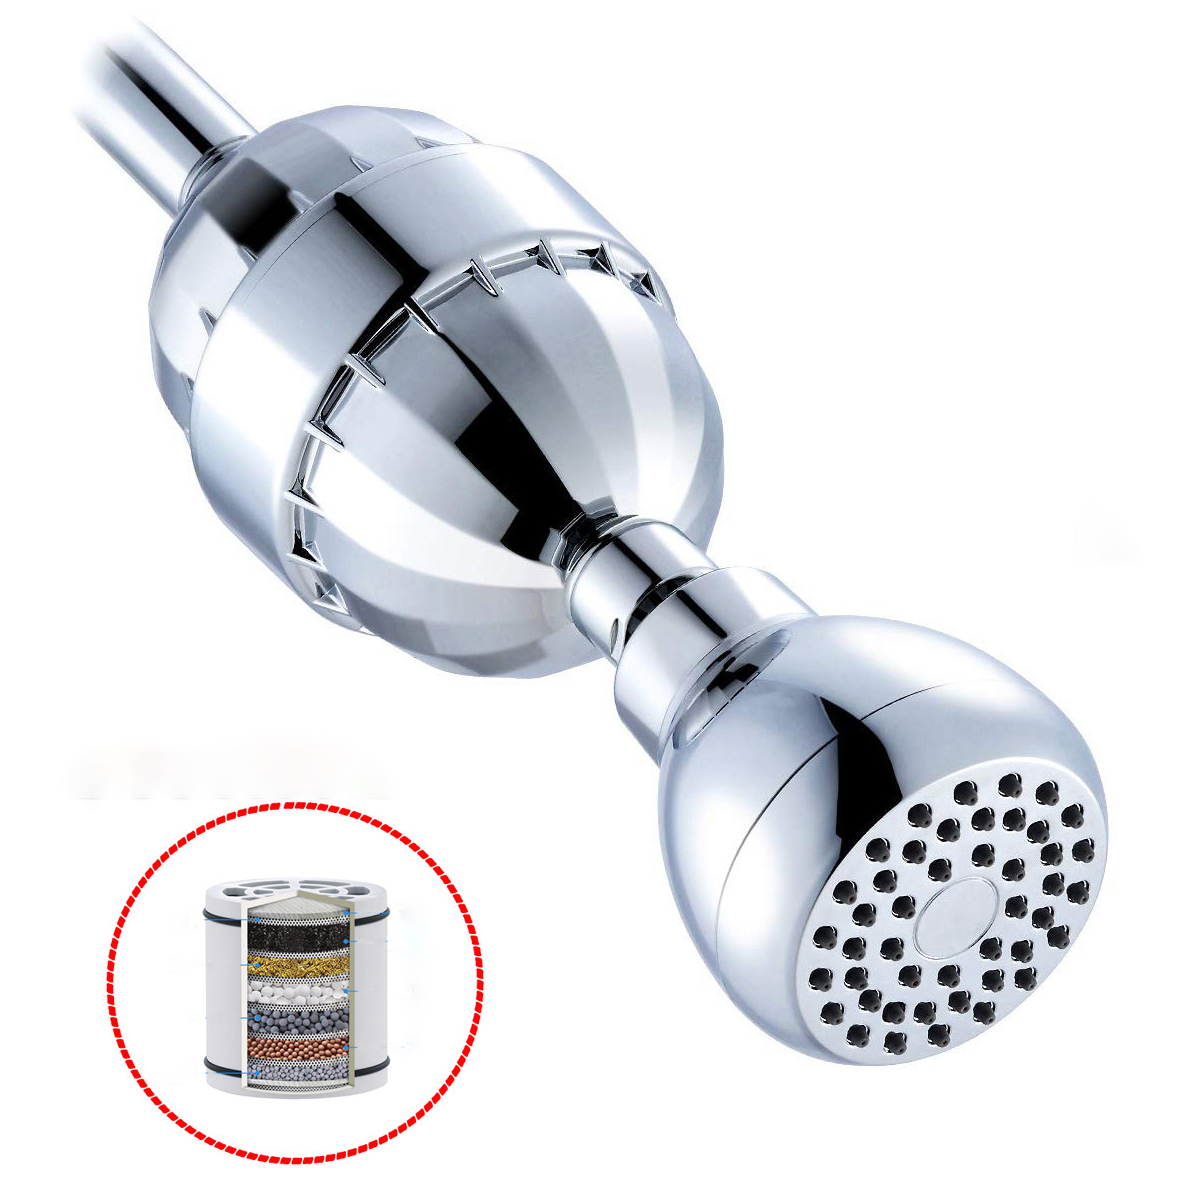 15 Stages Shower Water Filter With Showerhead Removes Chlorine